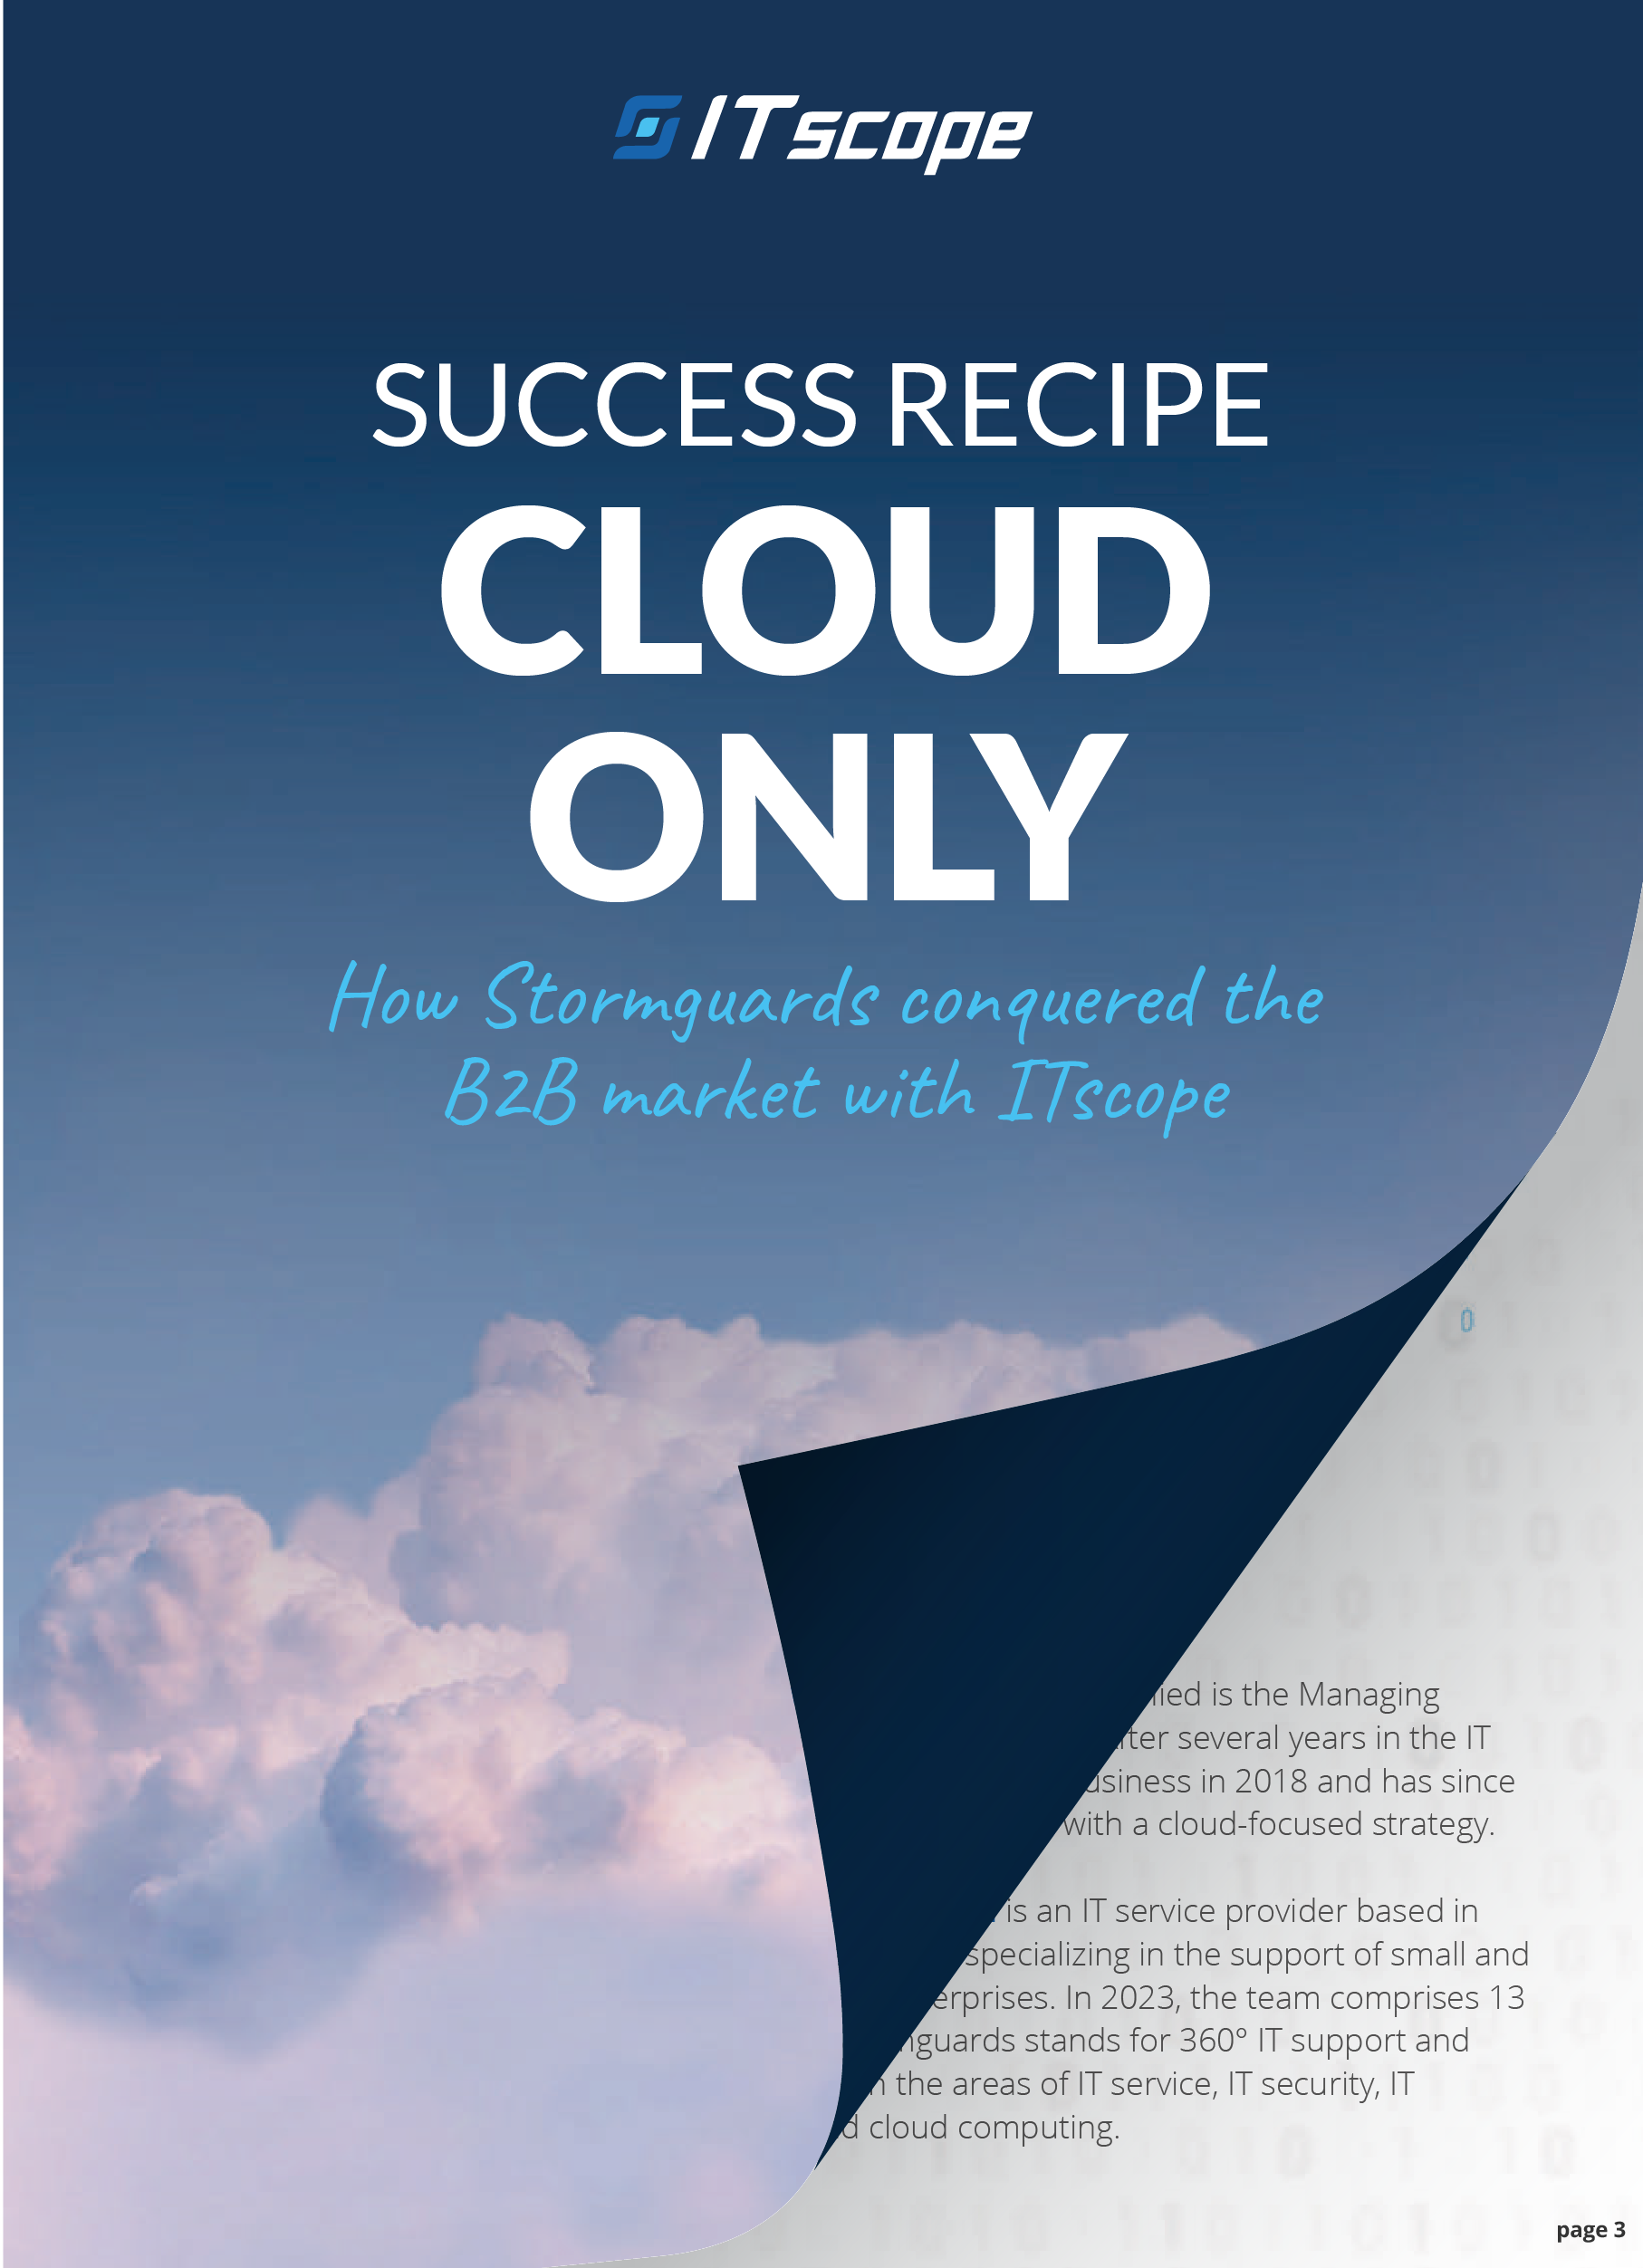 Sucess Recipe Cloud only - How Stormguards conquered the B2B market with ITscope